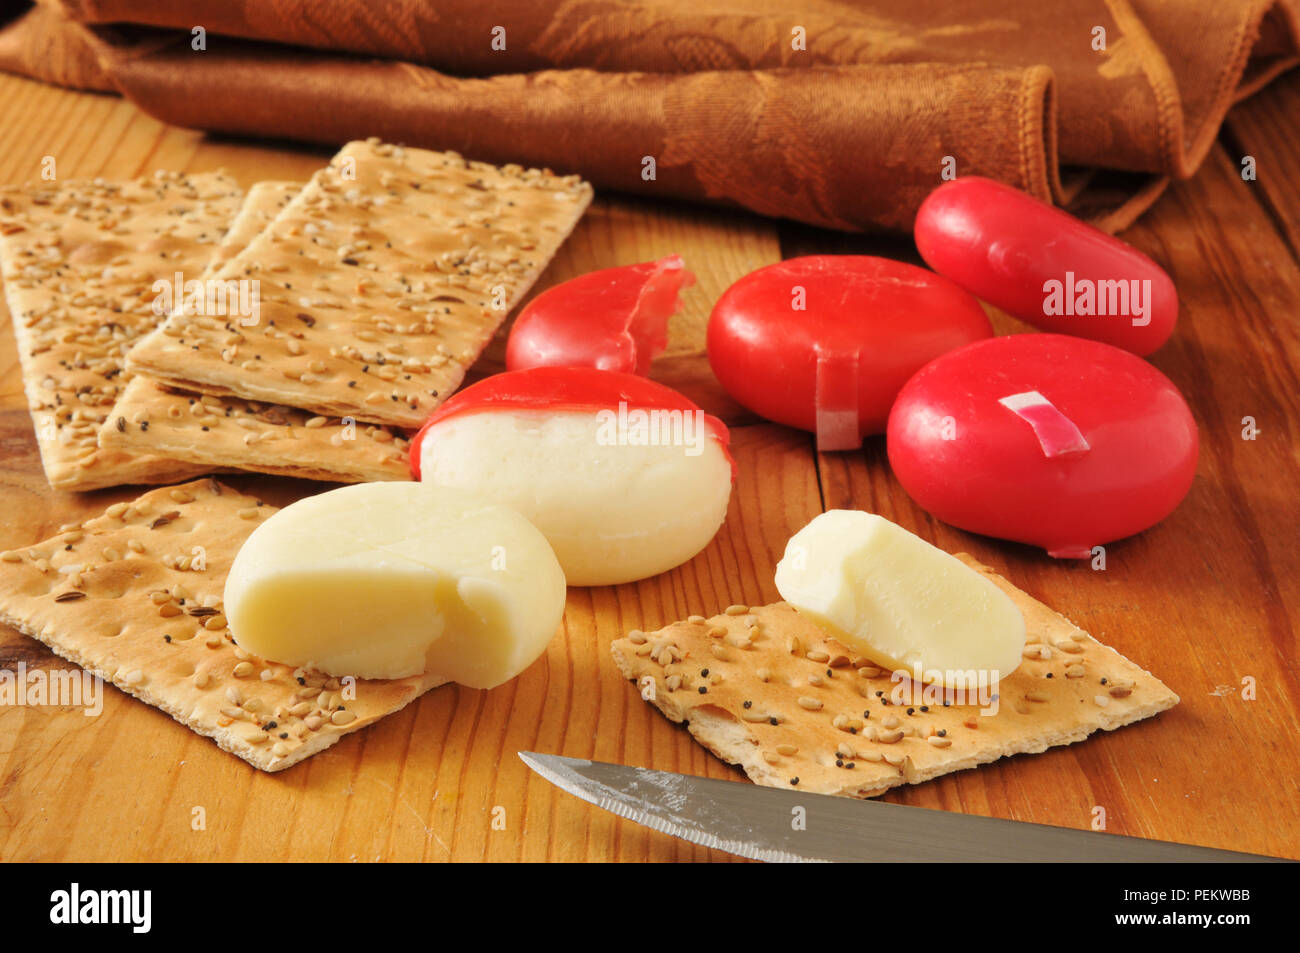 Sharp, white cheddar cheese with flatbread crackers Stock Photo